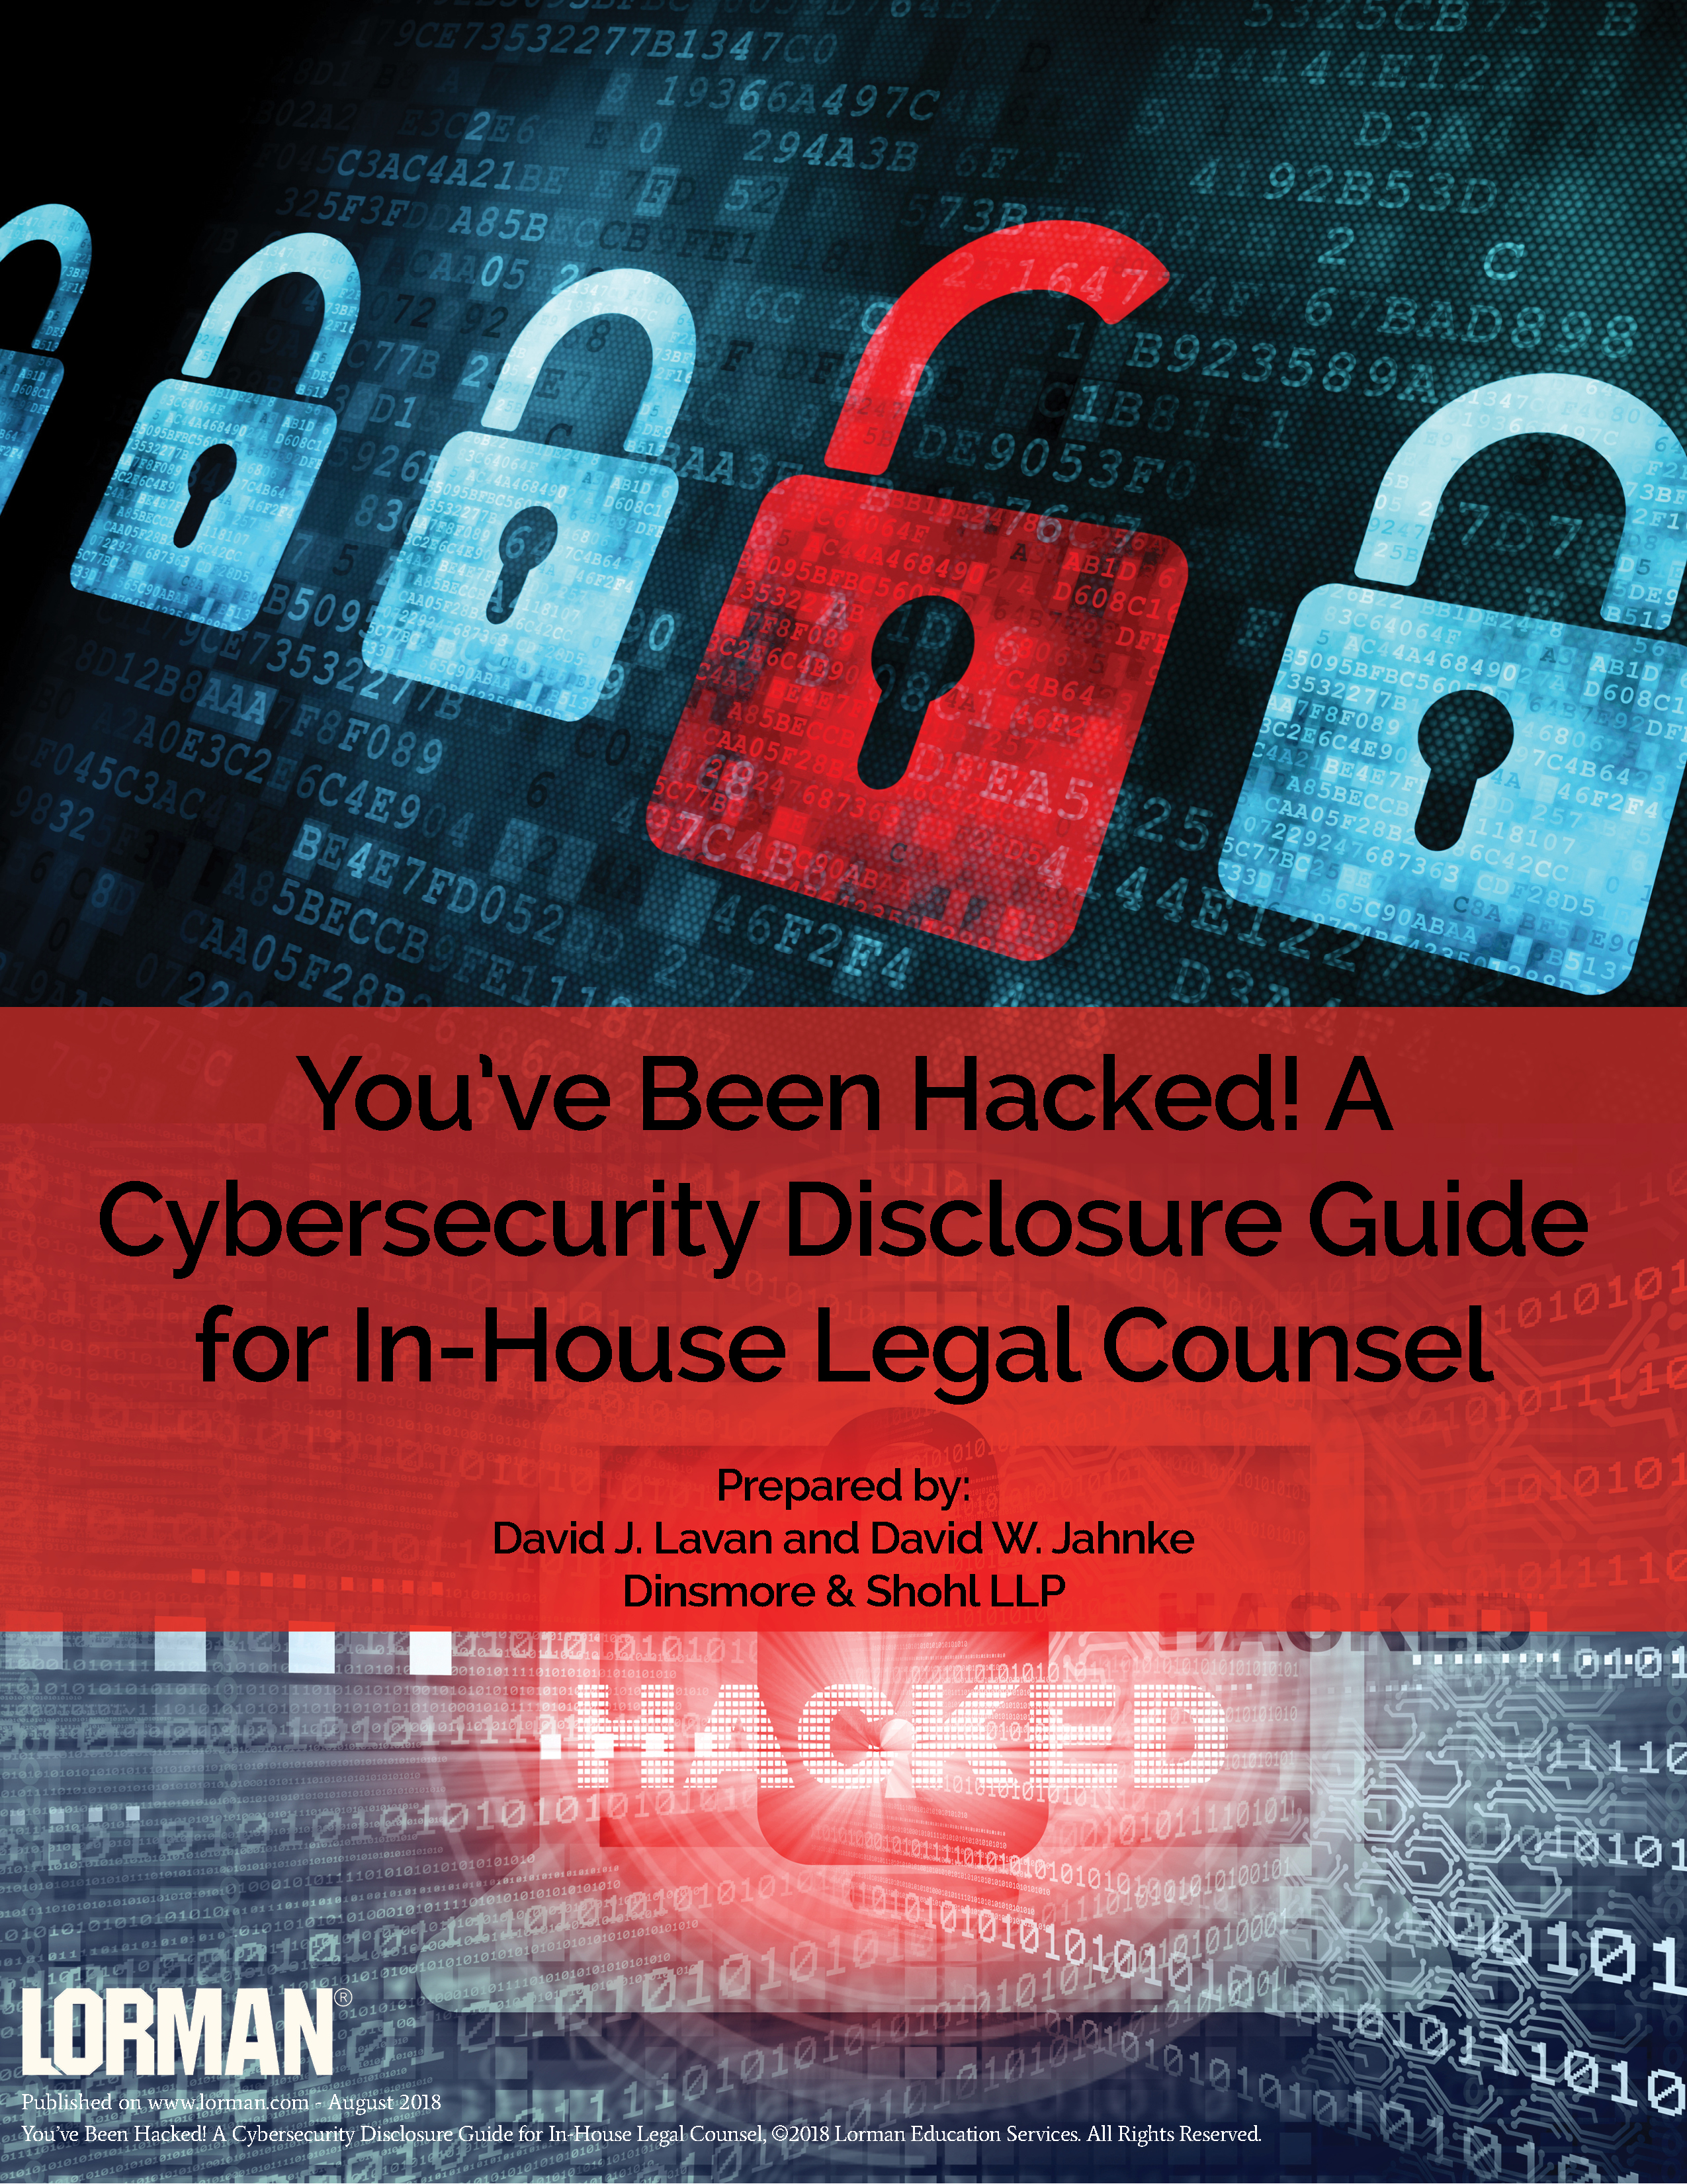 You’ve Been Hacked! A Cybersecurity Disclosure Guide for In-House Legal Counsel